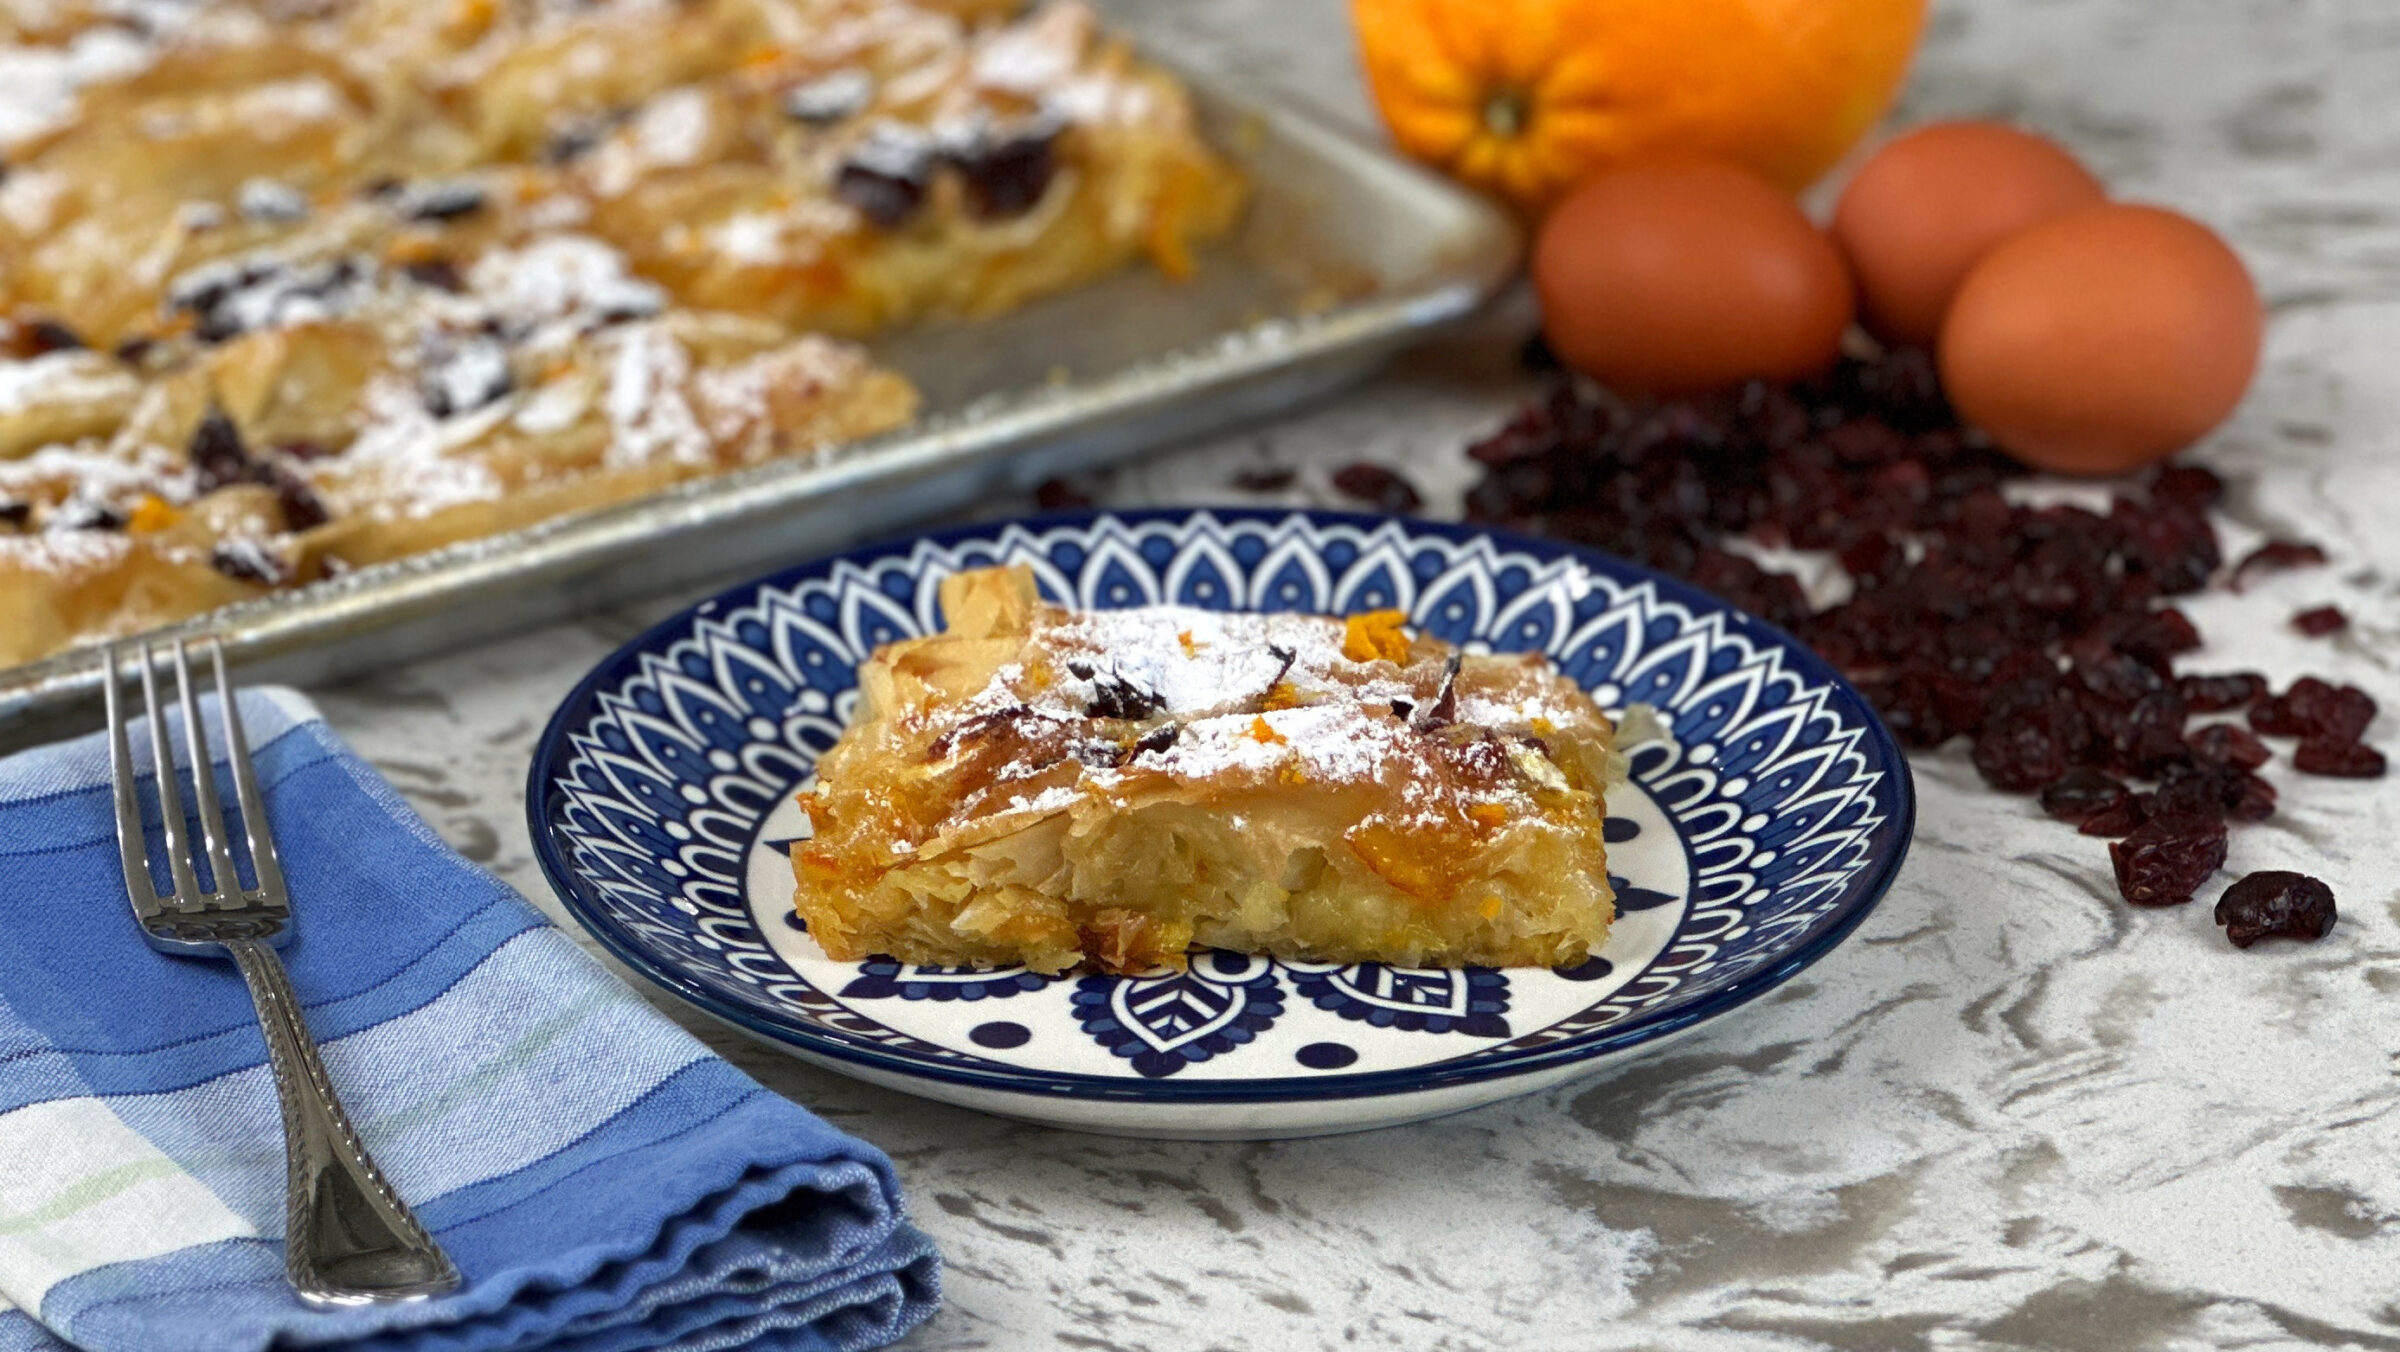 Phyllo pie on blue plate with fork orange eggs and dried cranberries